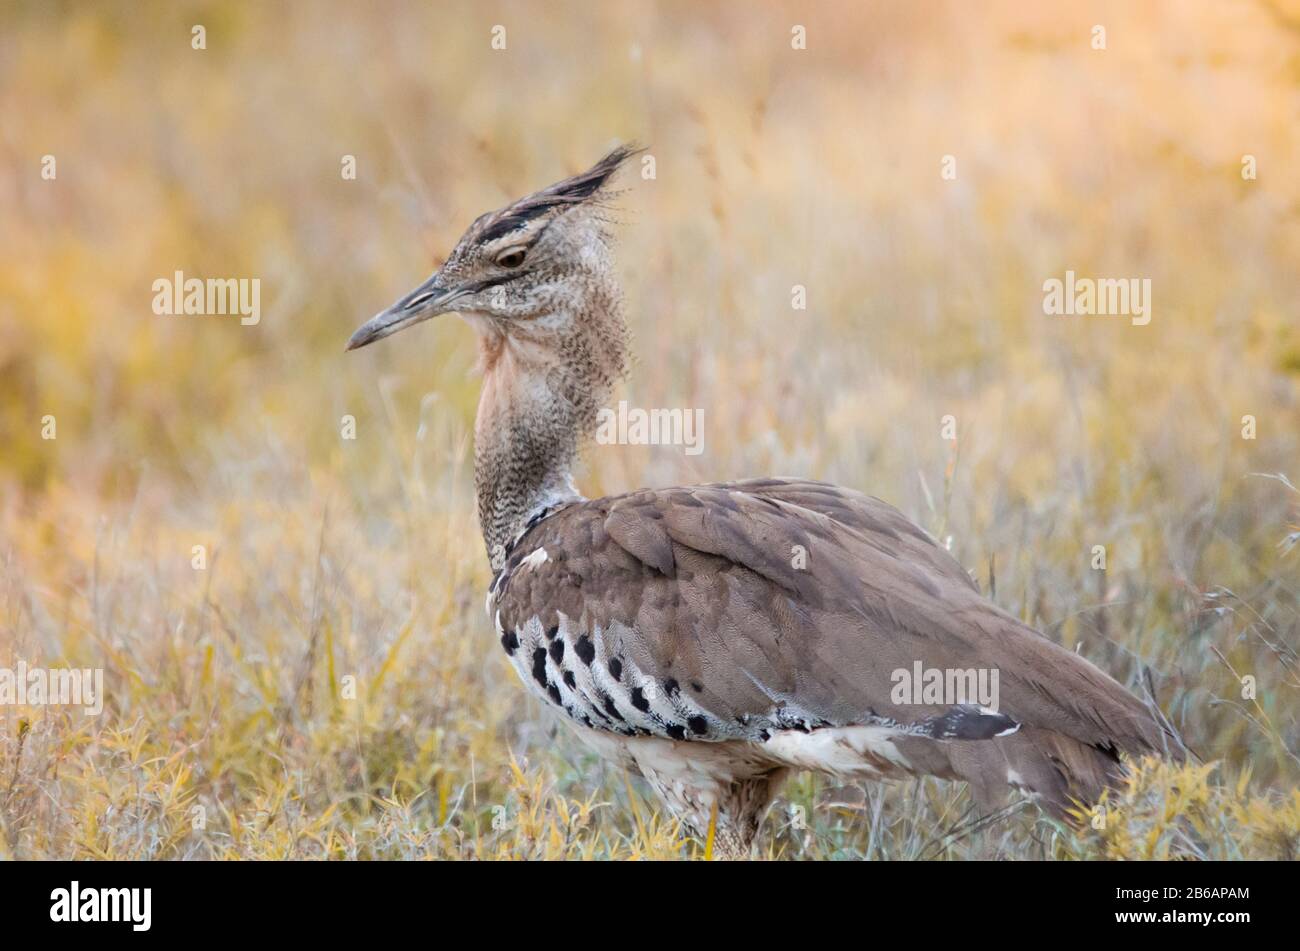 A Kori bustard (ardeotis kori), a large african bird standing in the grass in the Kruger national park, a game reserve in South Africa. Stock Photo